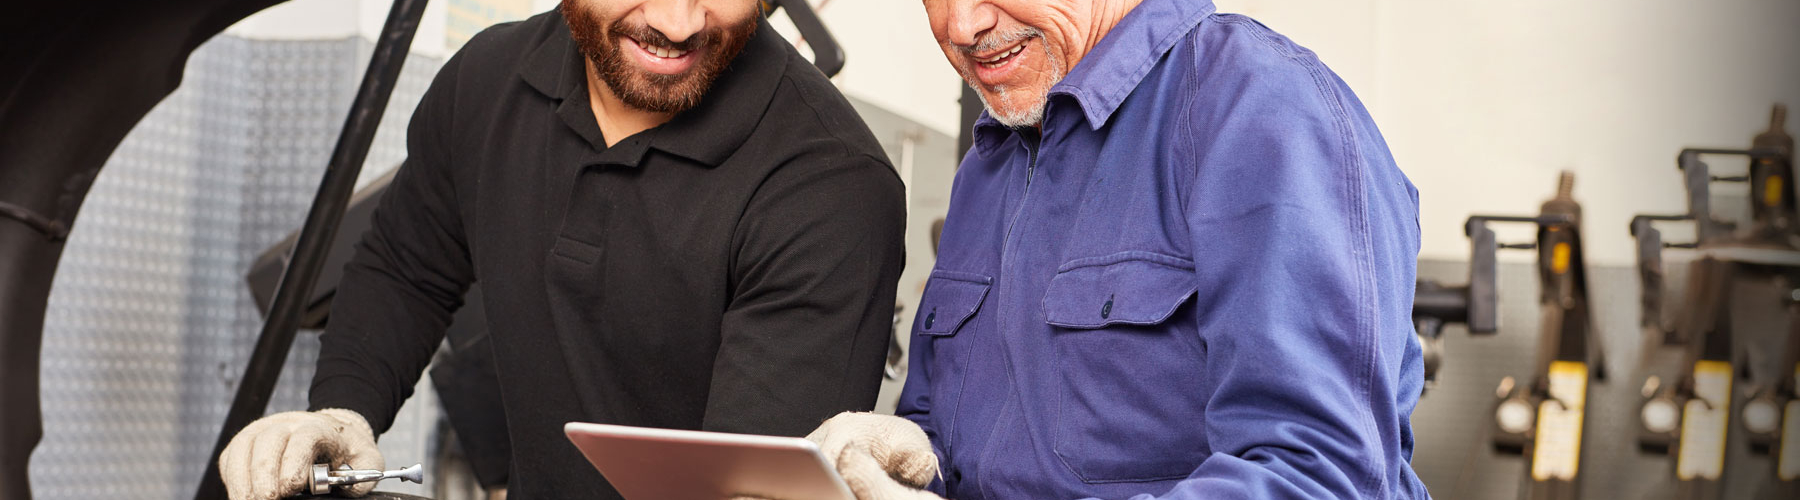 two tire technicians checking at something on a tablet